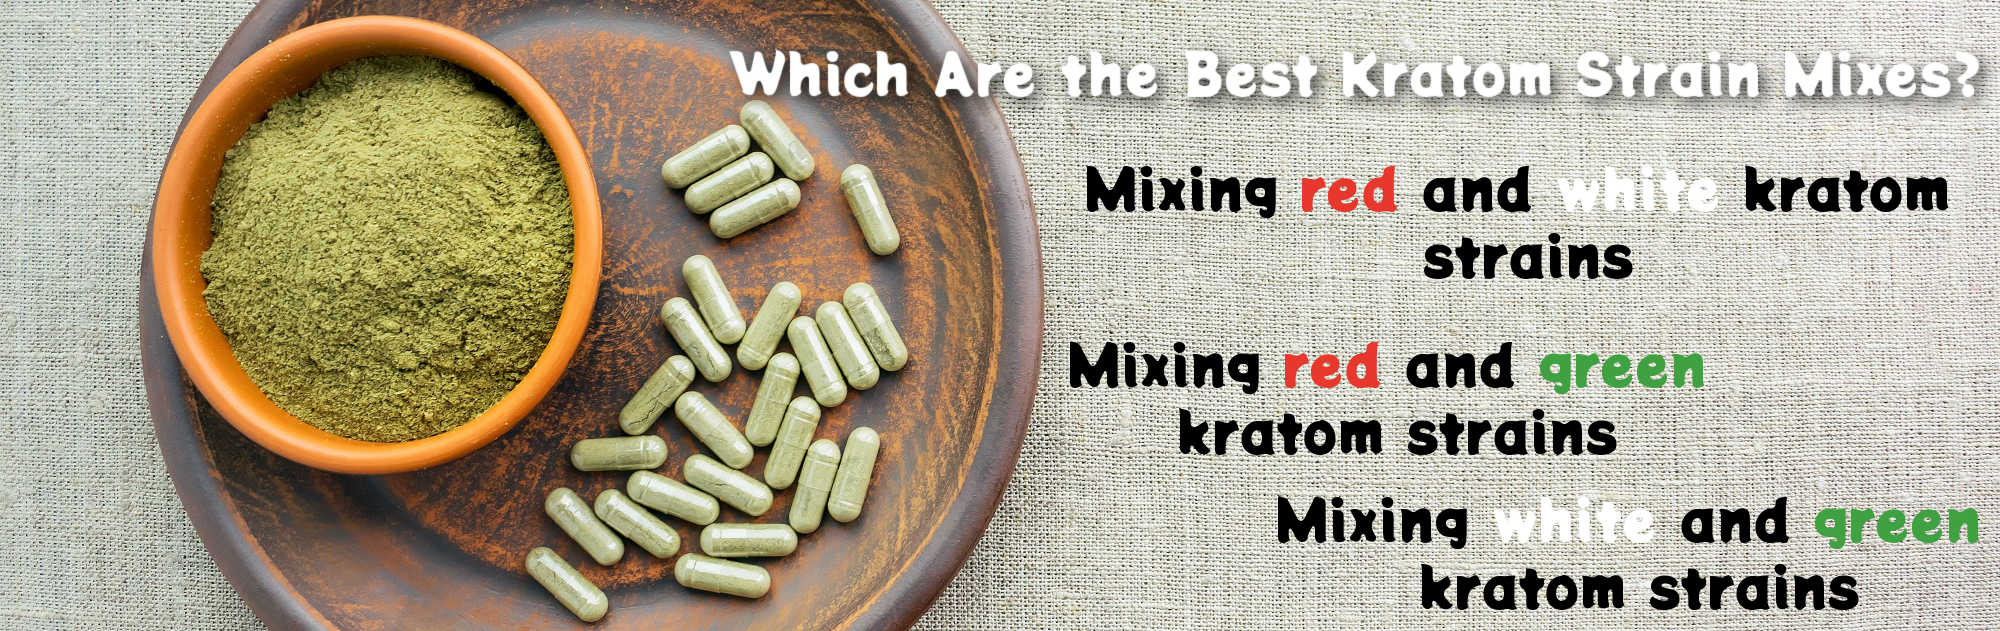 Mixing Kratom Strains : The Best Kratom Strain Mixes to Try at Home